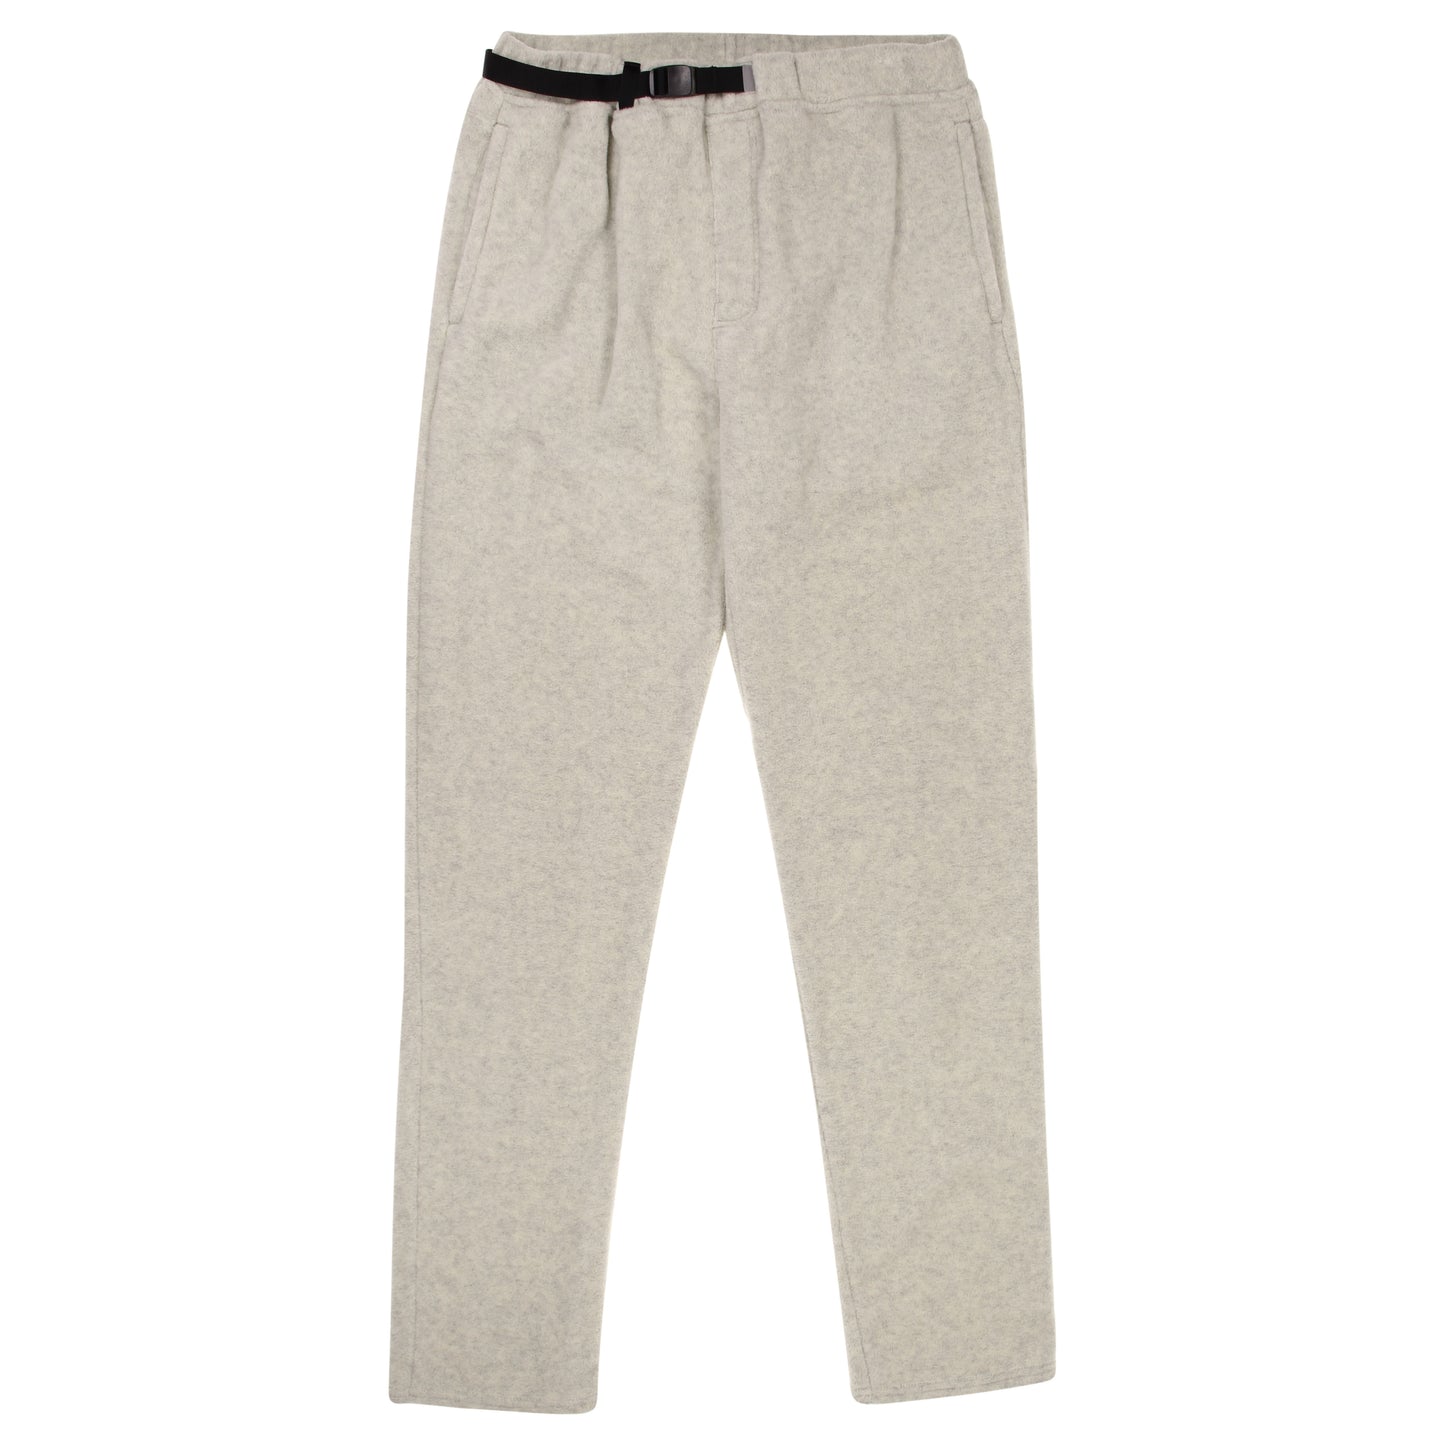 Used Patagonia Synchilla Snap-T Fleece Pants